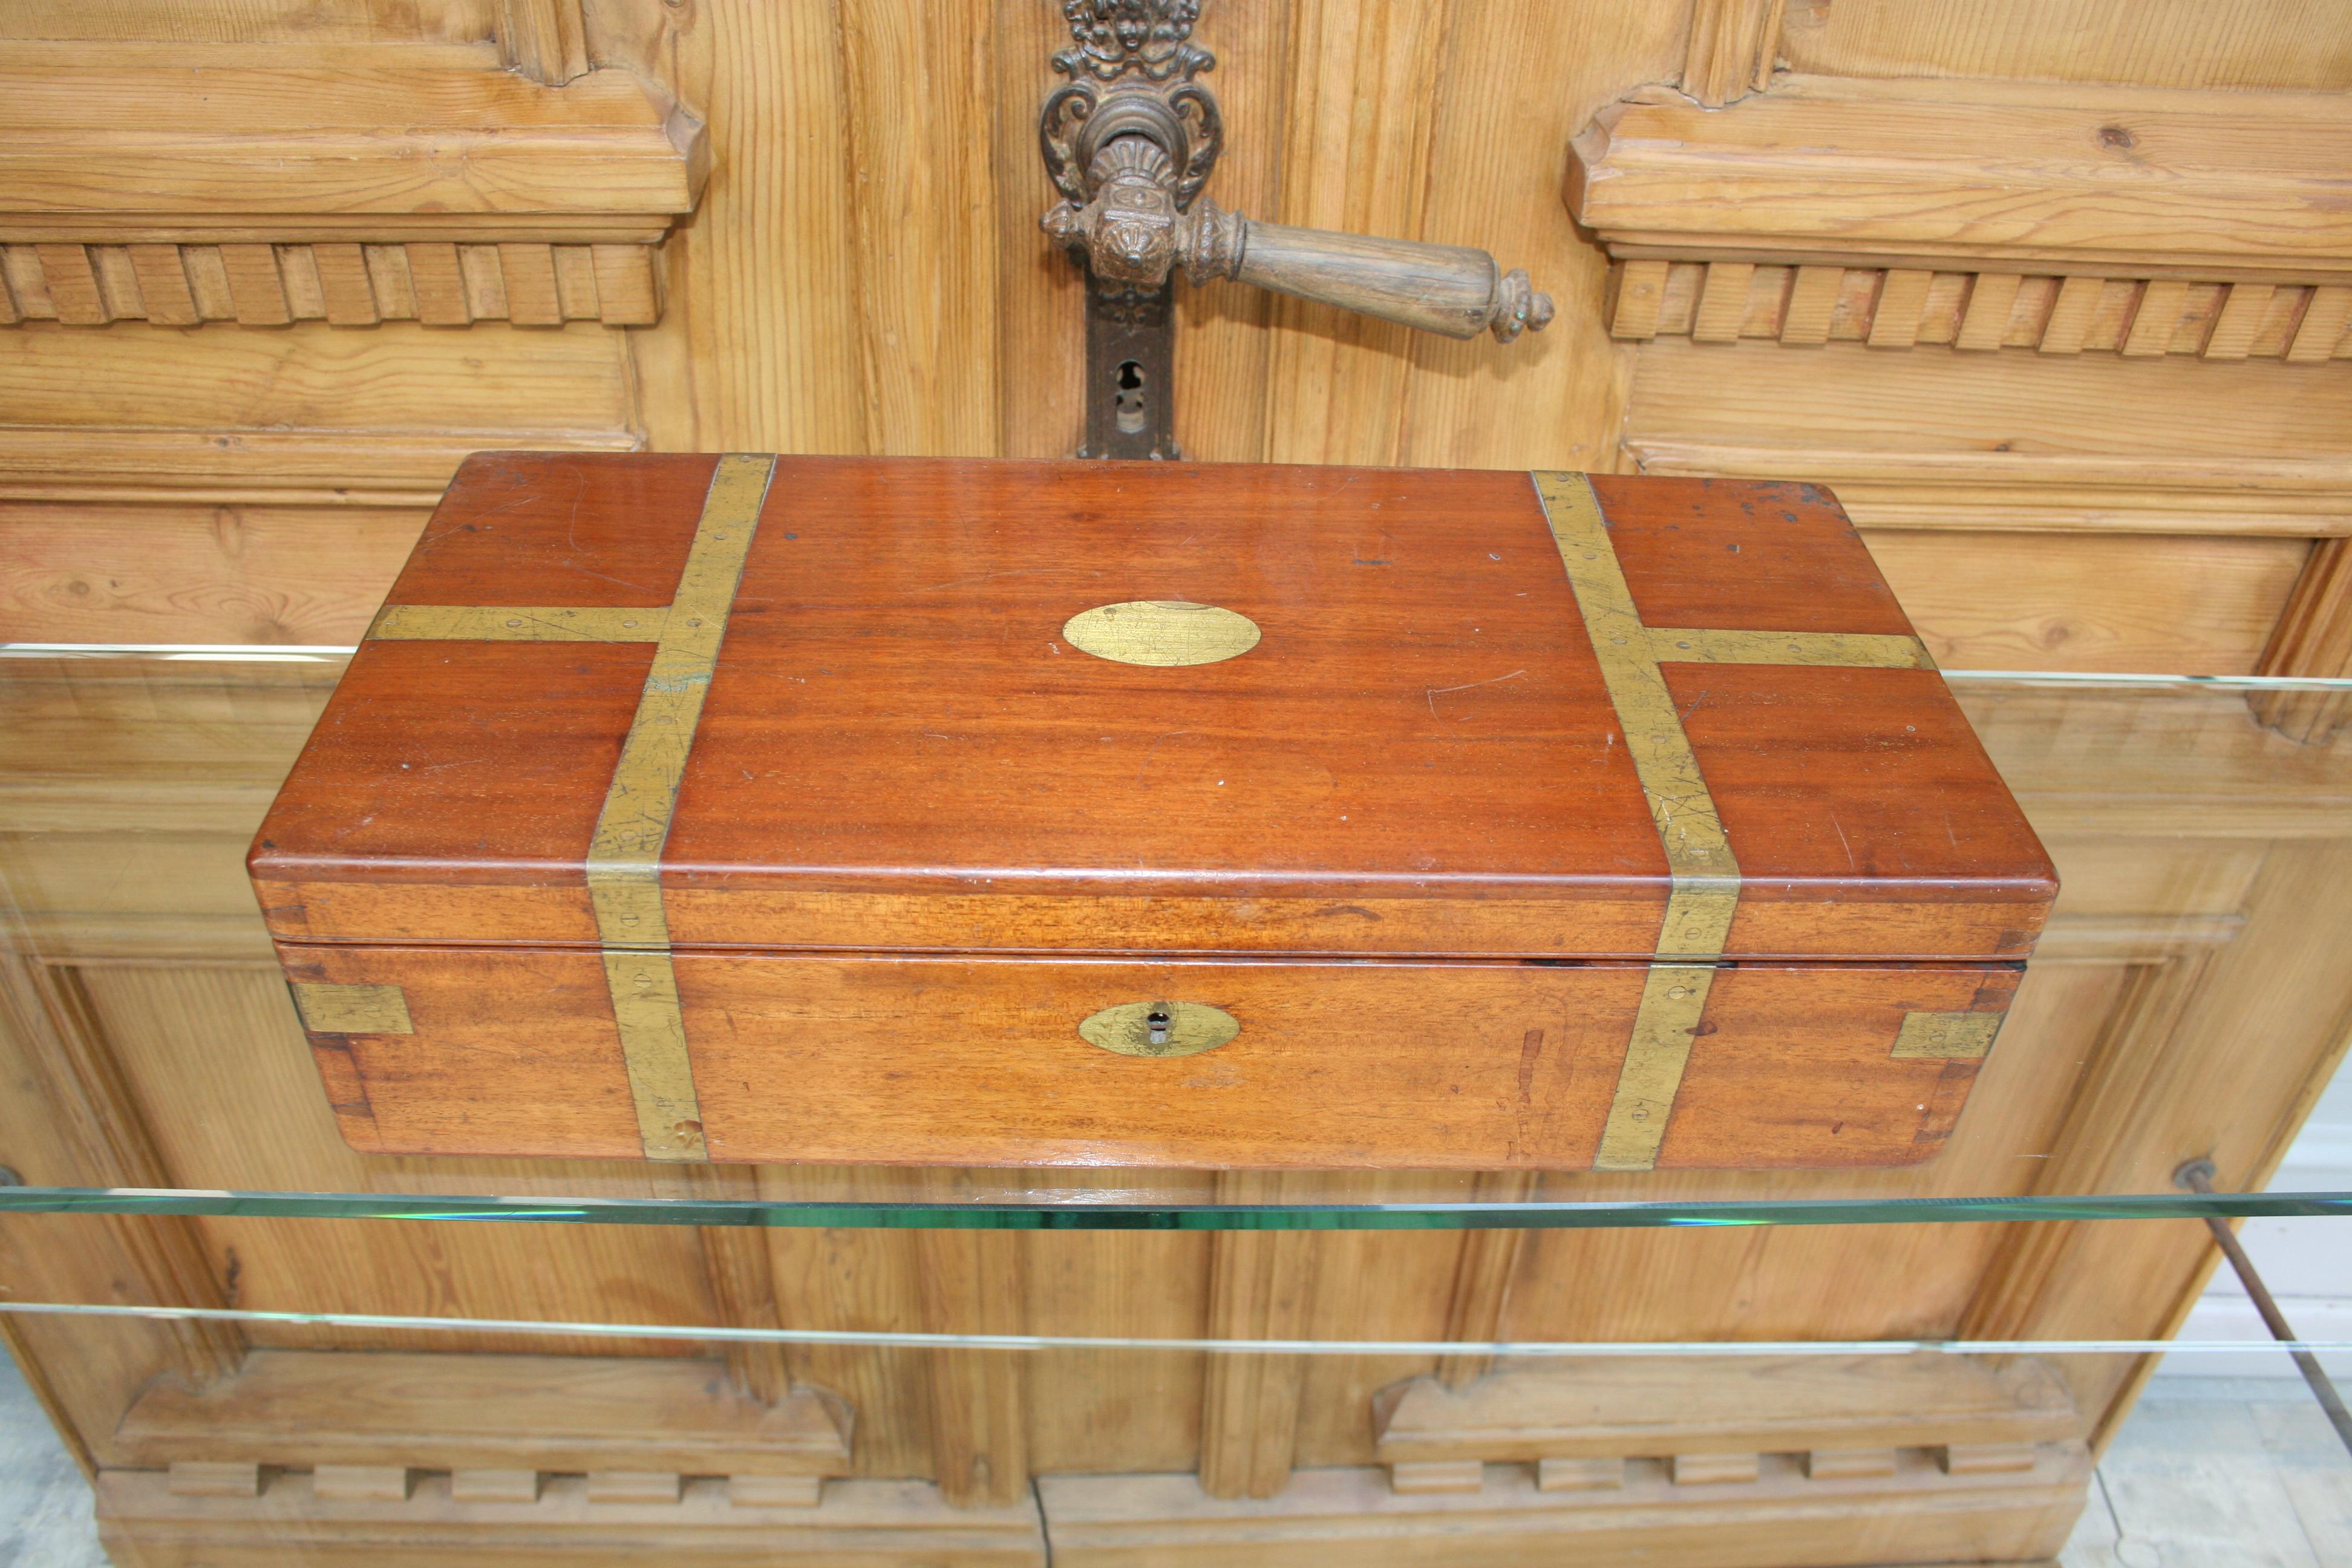 Curious antique English box made of mahogany with brass details, inside which are the working instruments of a pathologist. The division of the interior of the box is covered in red fabric and consists of several levels that can be taken out.